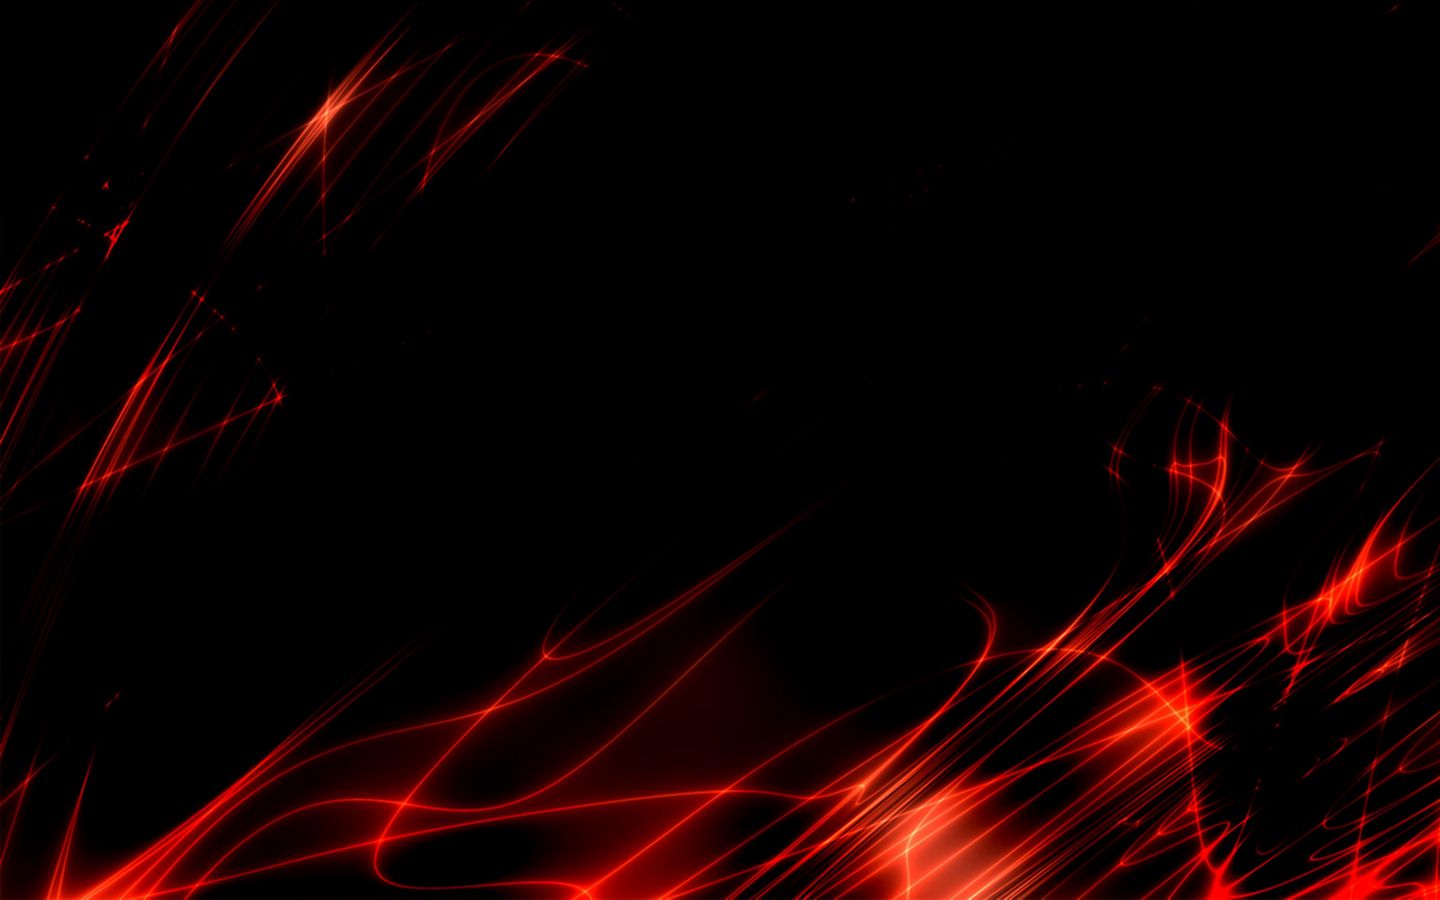 Download wallpaper 1440x900 lines, glitter, red, black, abstraction  widescreen 16:10 hd background